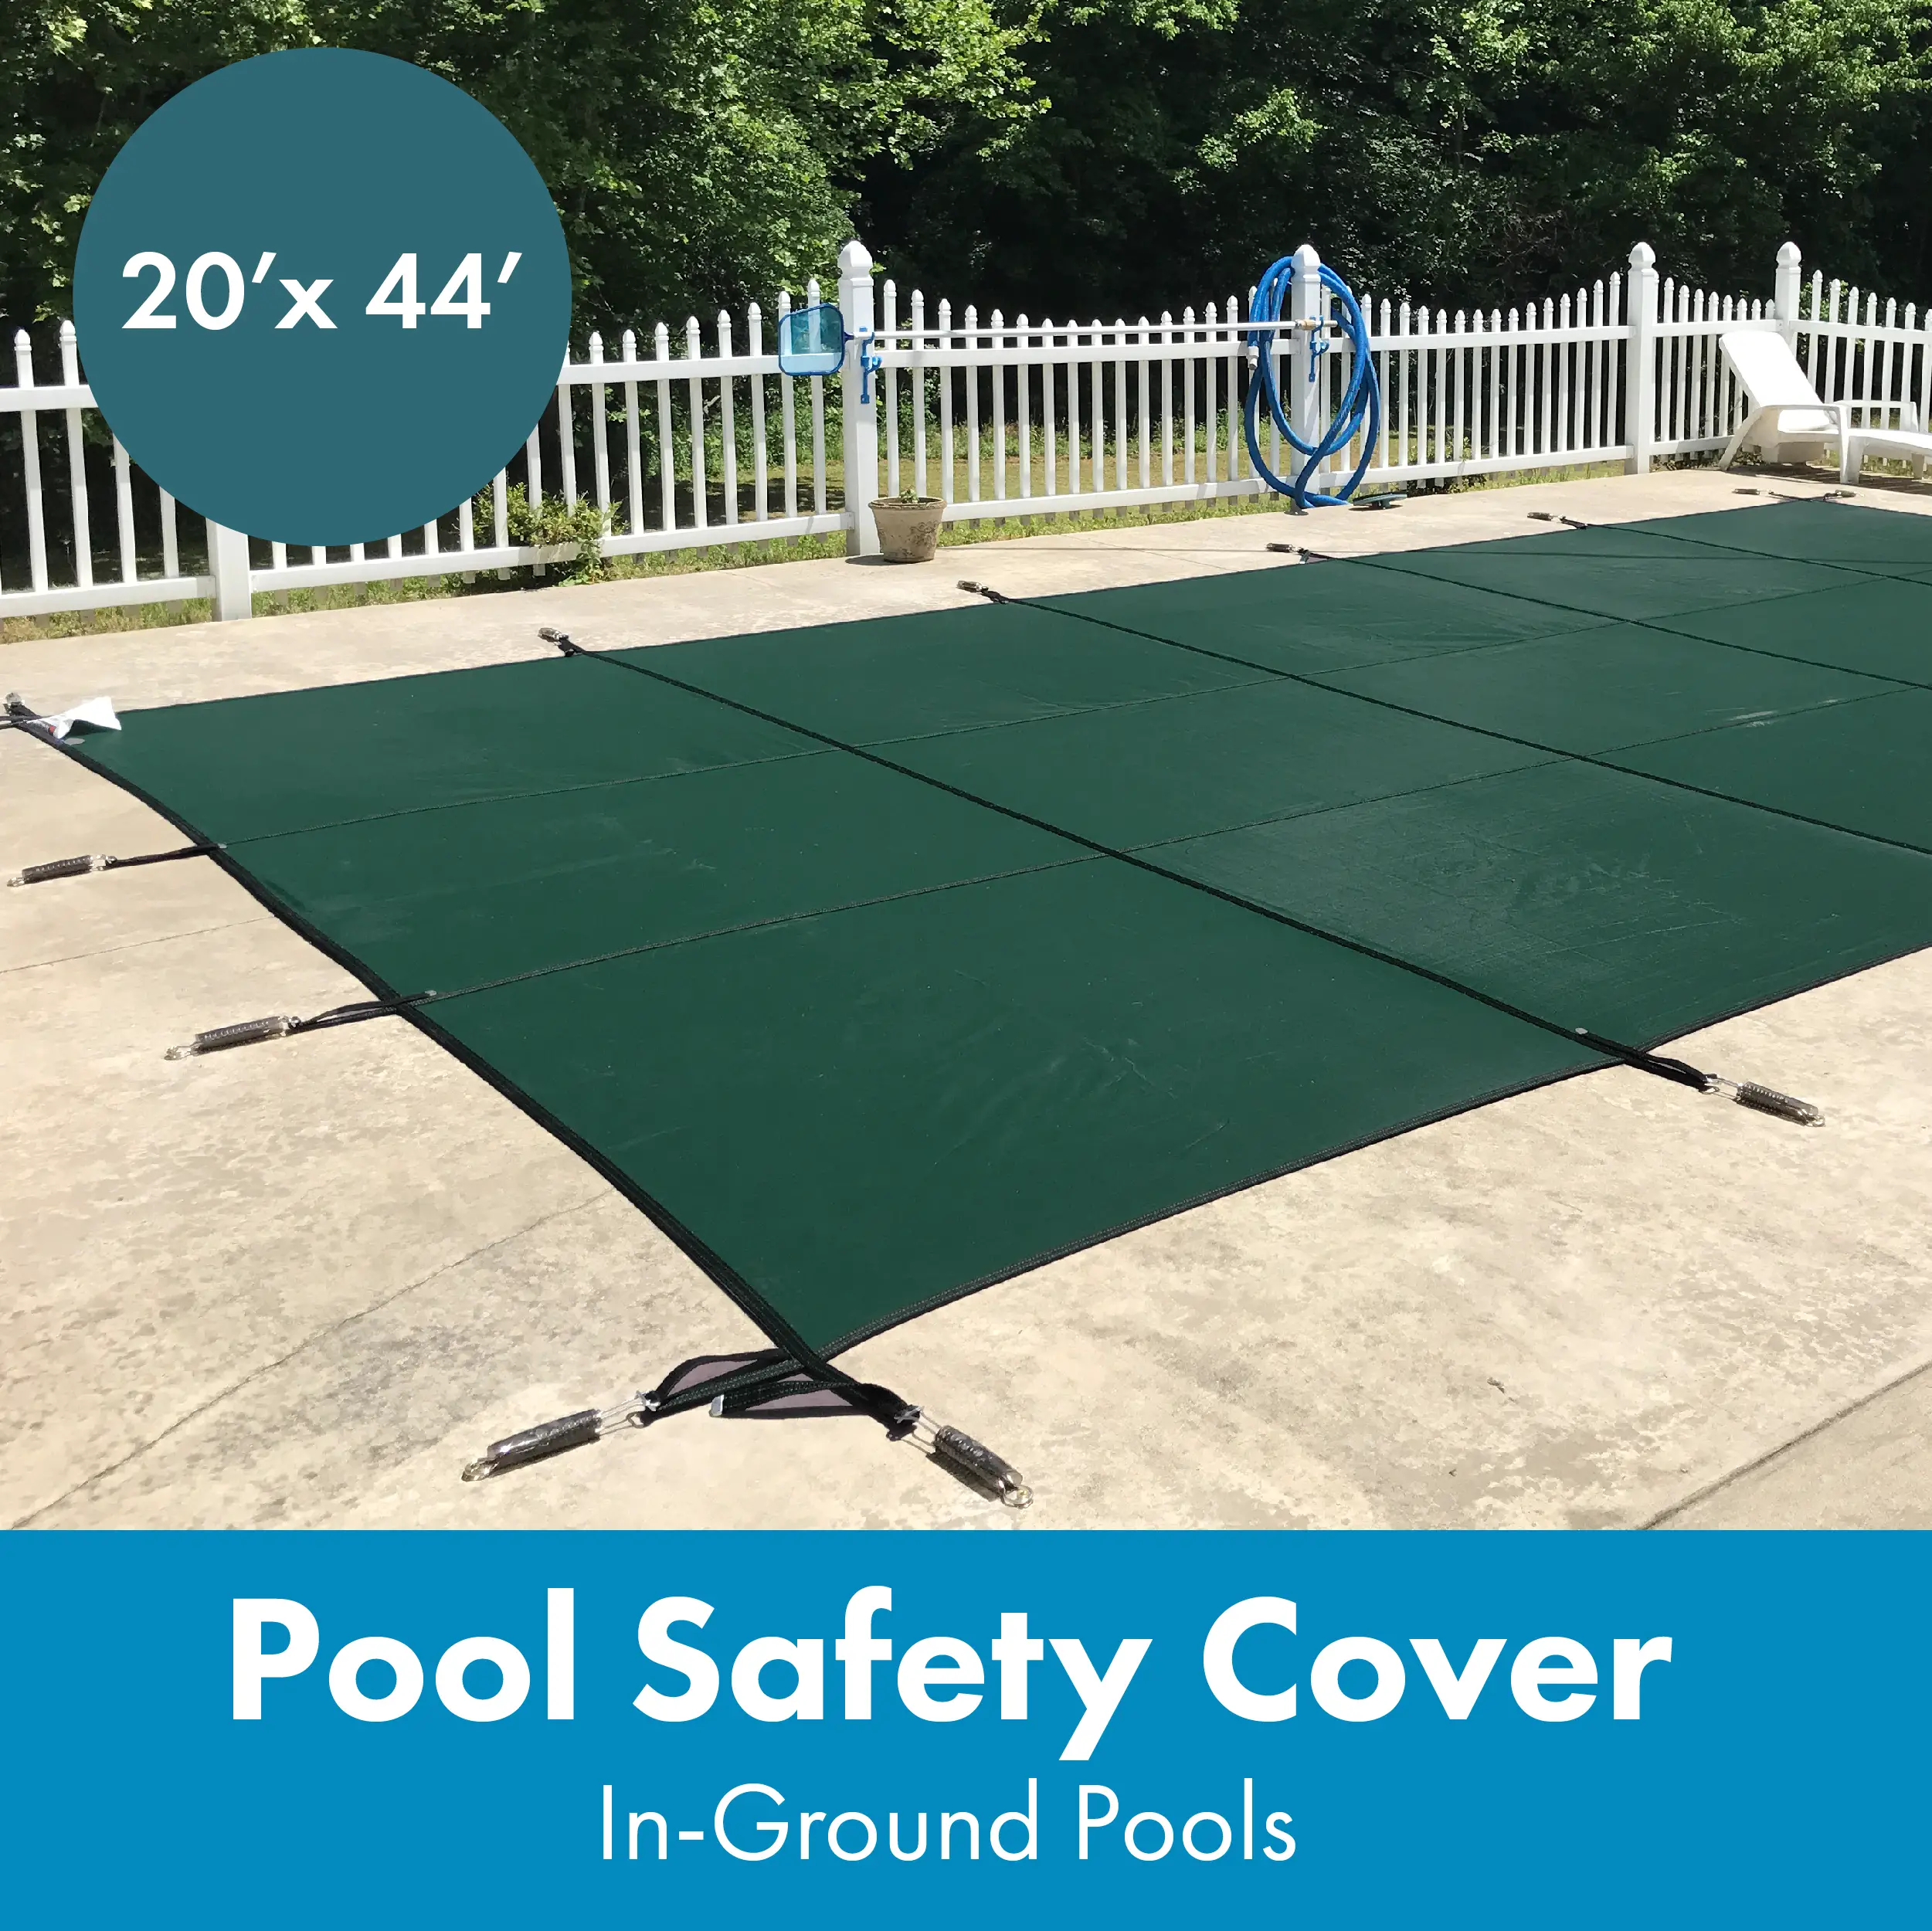 WaterWarden Inground Pool Safety Cover, Fits 20 x 44, Green Mesh ...